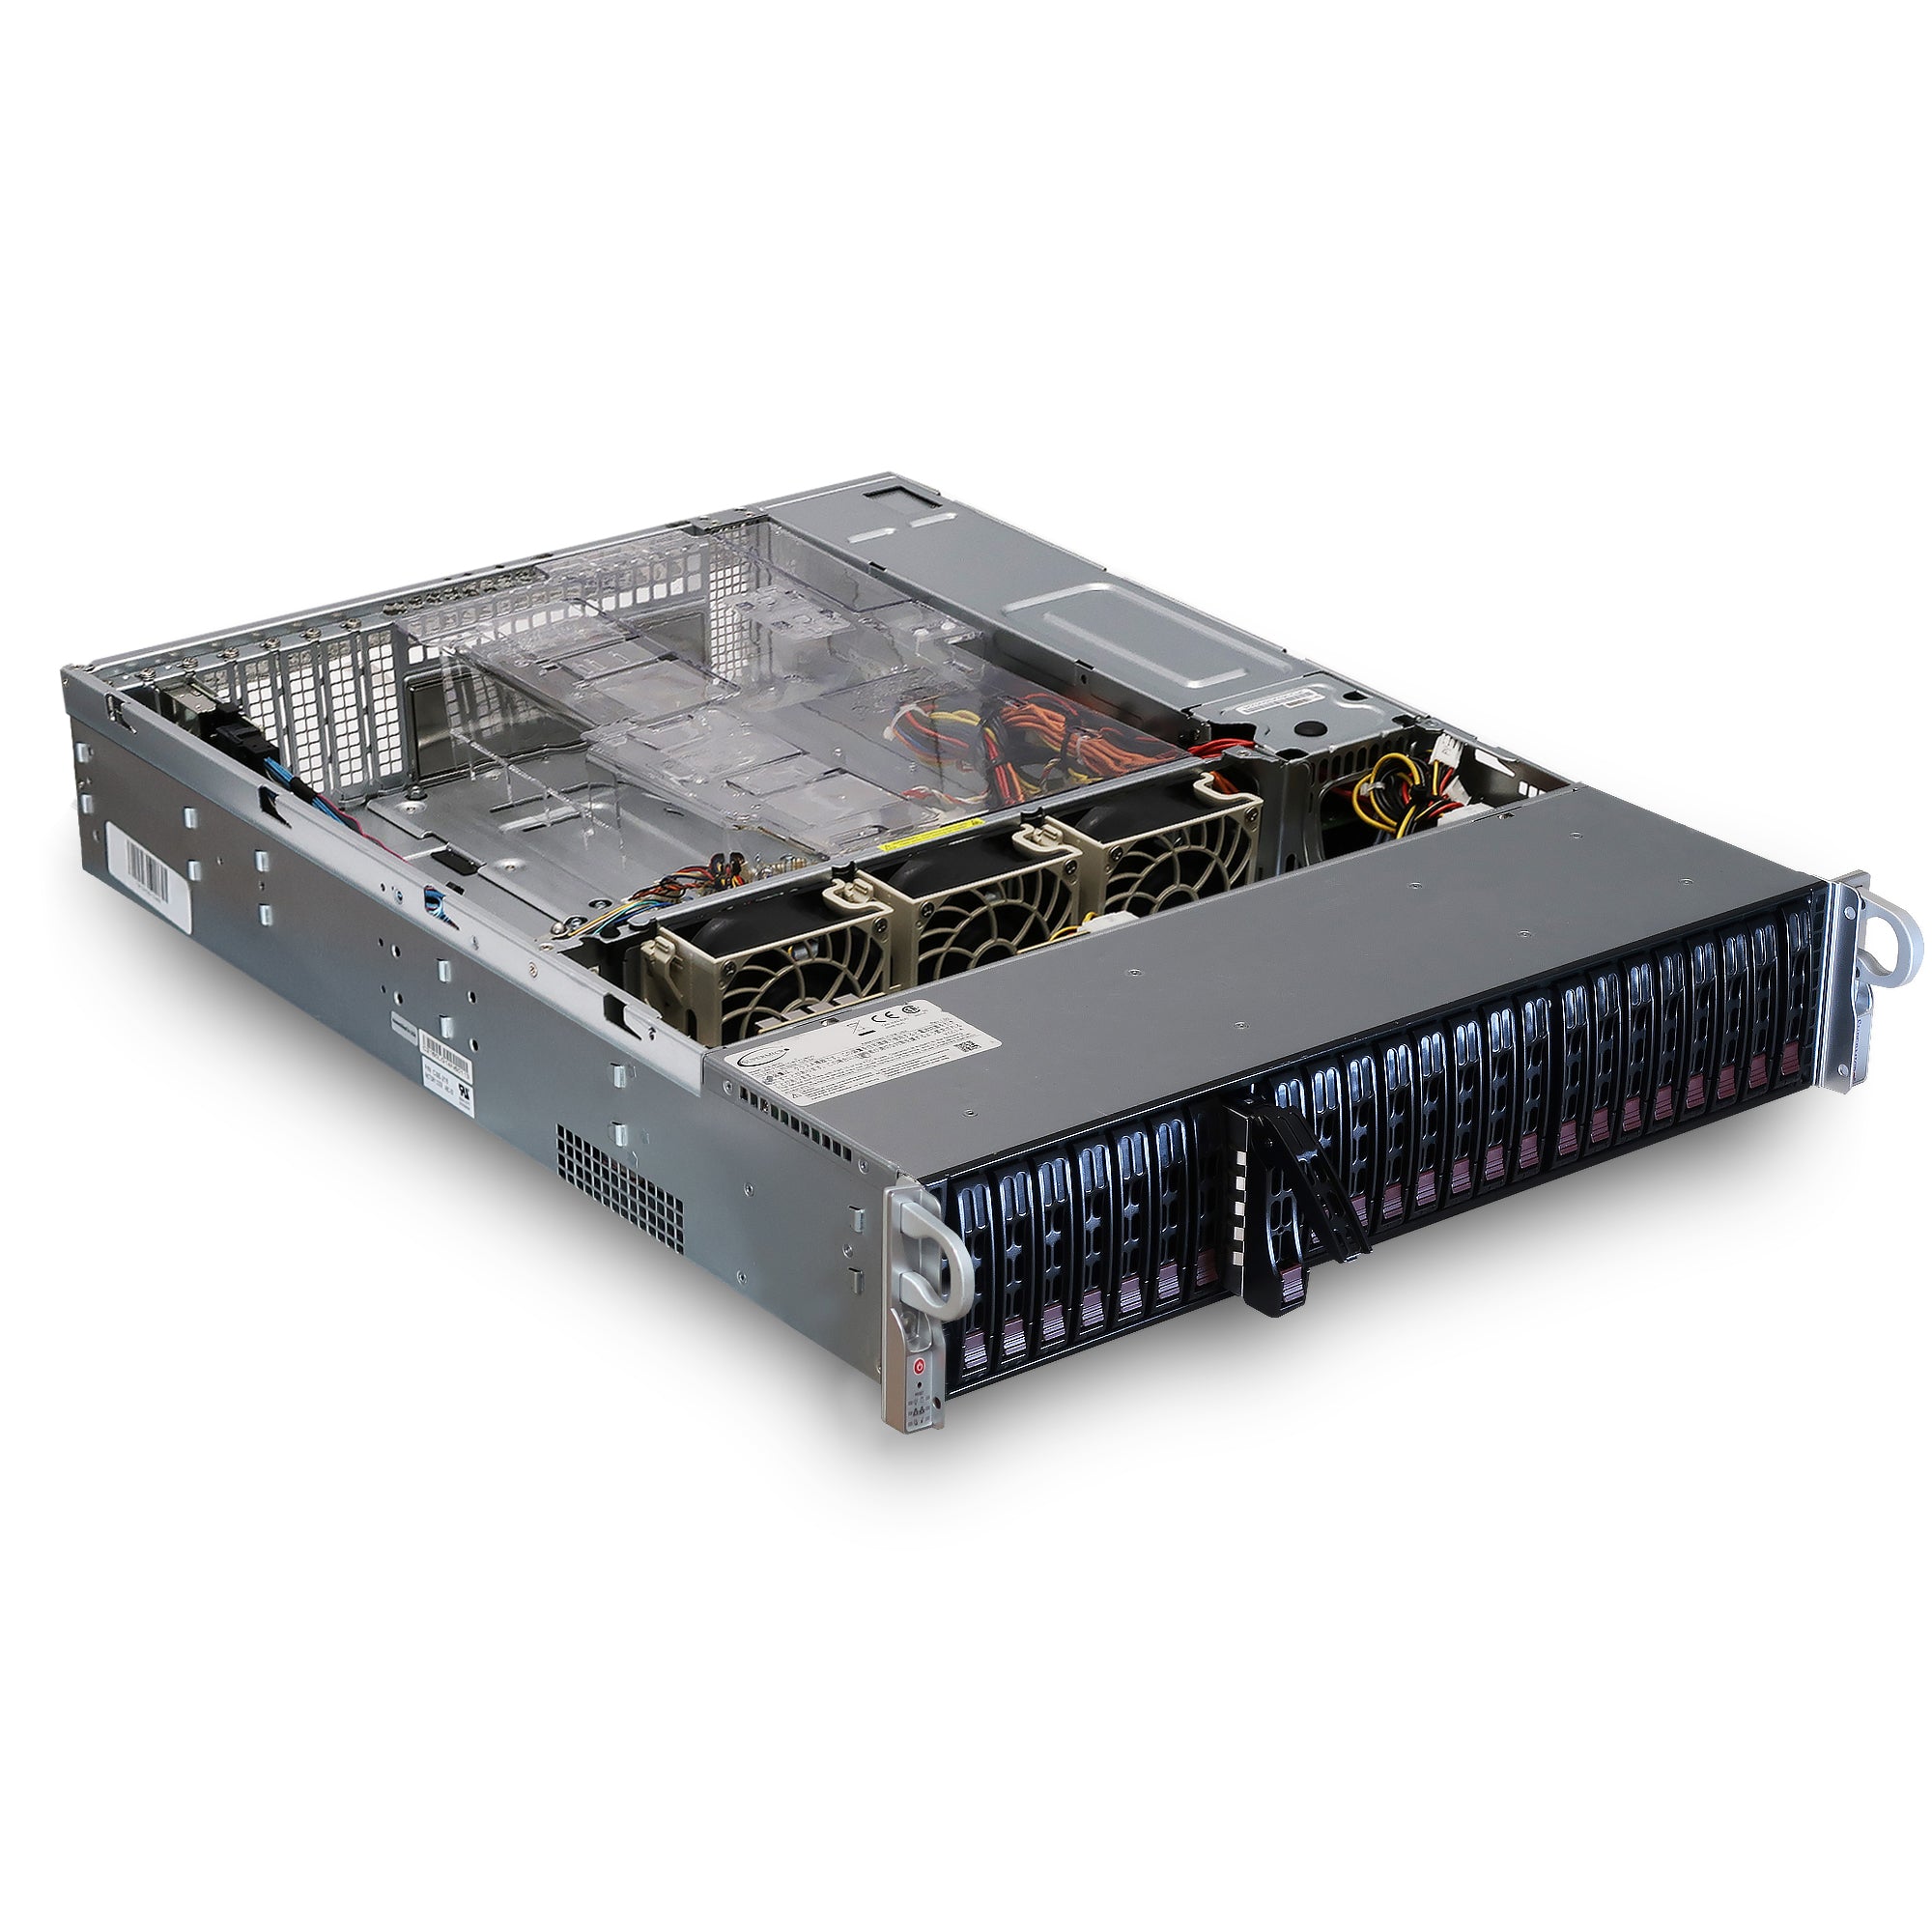 Supermicro SuperChassis 216BE1C-R741JBOD 2U 24 Bay JBOD SFF SAS 12Gb/s Storage Chassis | 24x 2.5" SAS/SATA Front Loading Expansion Enclosure - Lid Removed